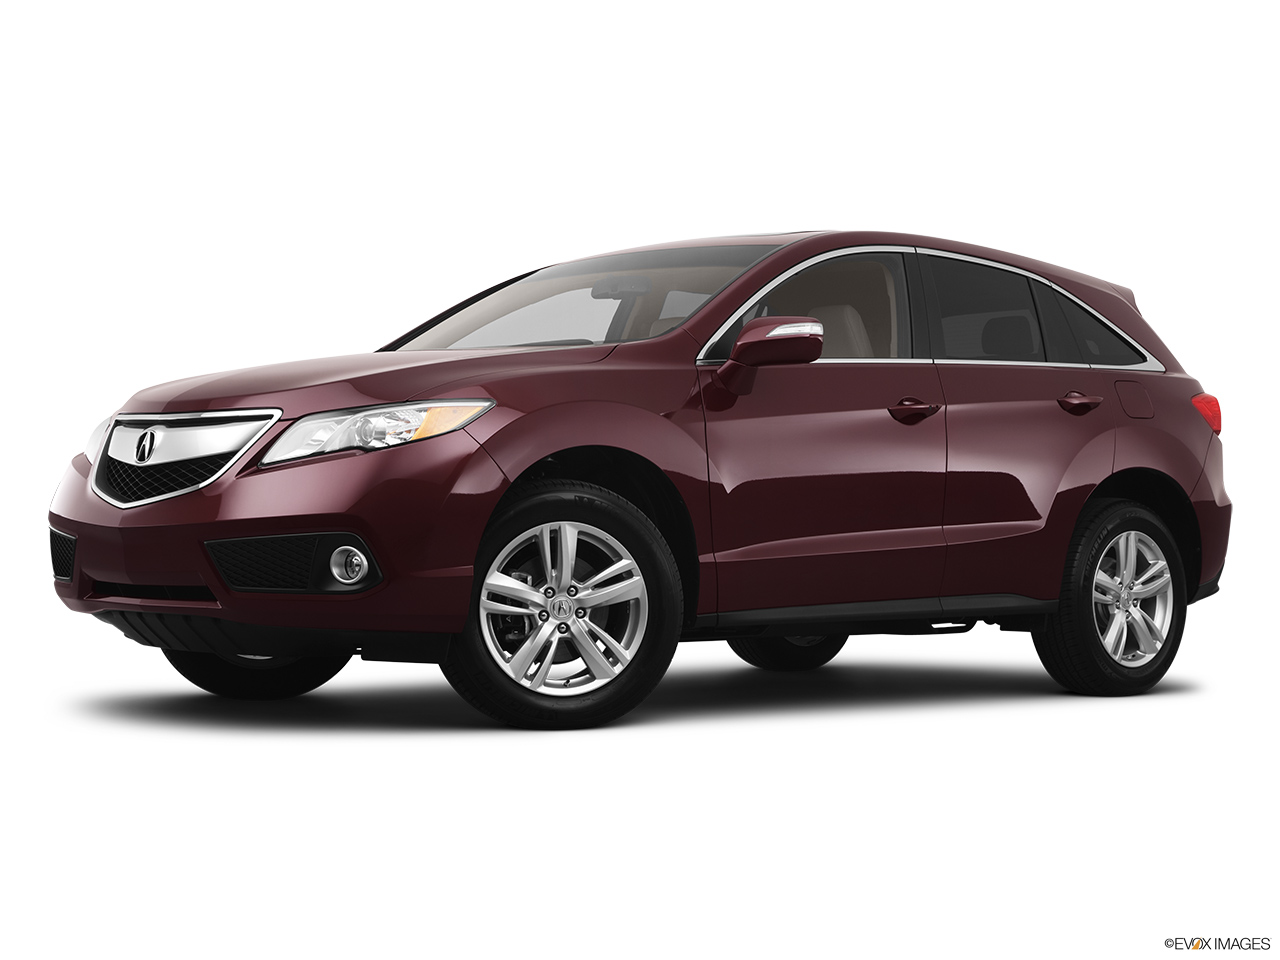 2013 Acura RDX AWD Low/wide front 5/8. 